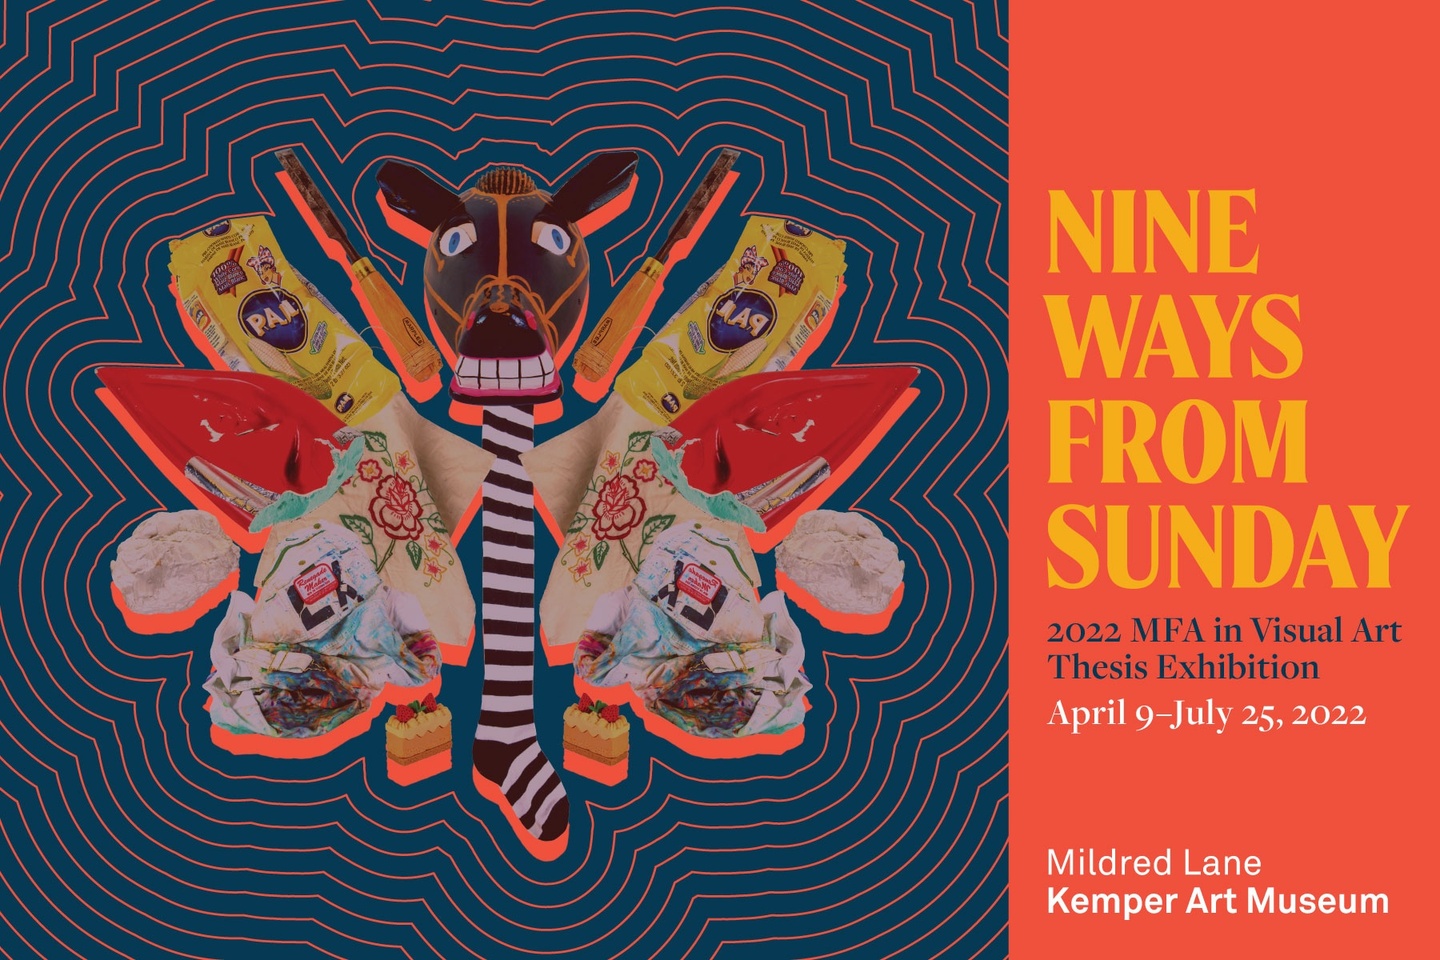 Mirrored graphic of strange objects surmounted by a wooden horse head with red lines radiating outwards. Text to the right reads "Nine Ways from Sunday: 2022 MFA in Visual Art Thesis Exhibition, April 9 through July 25, 2022."